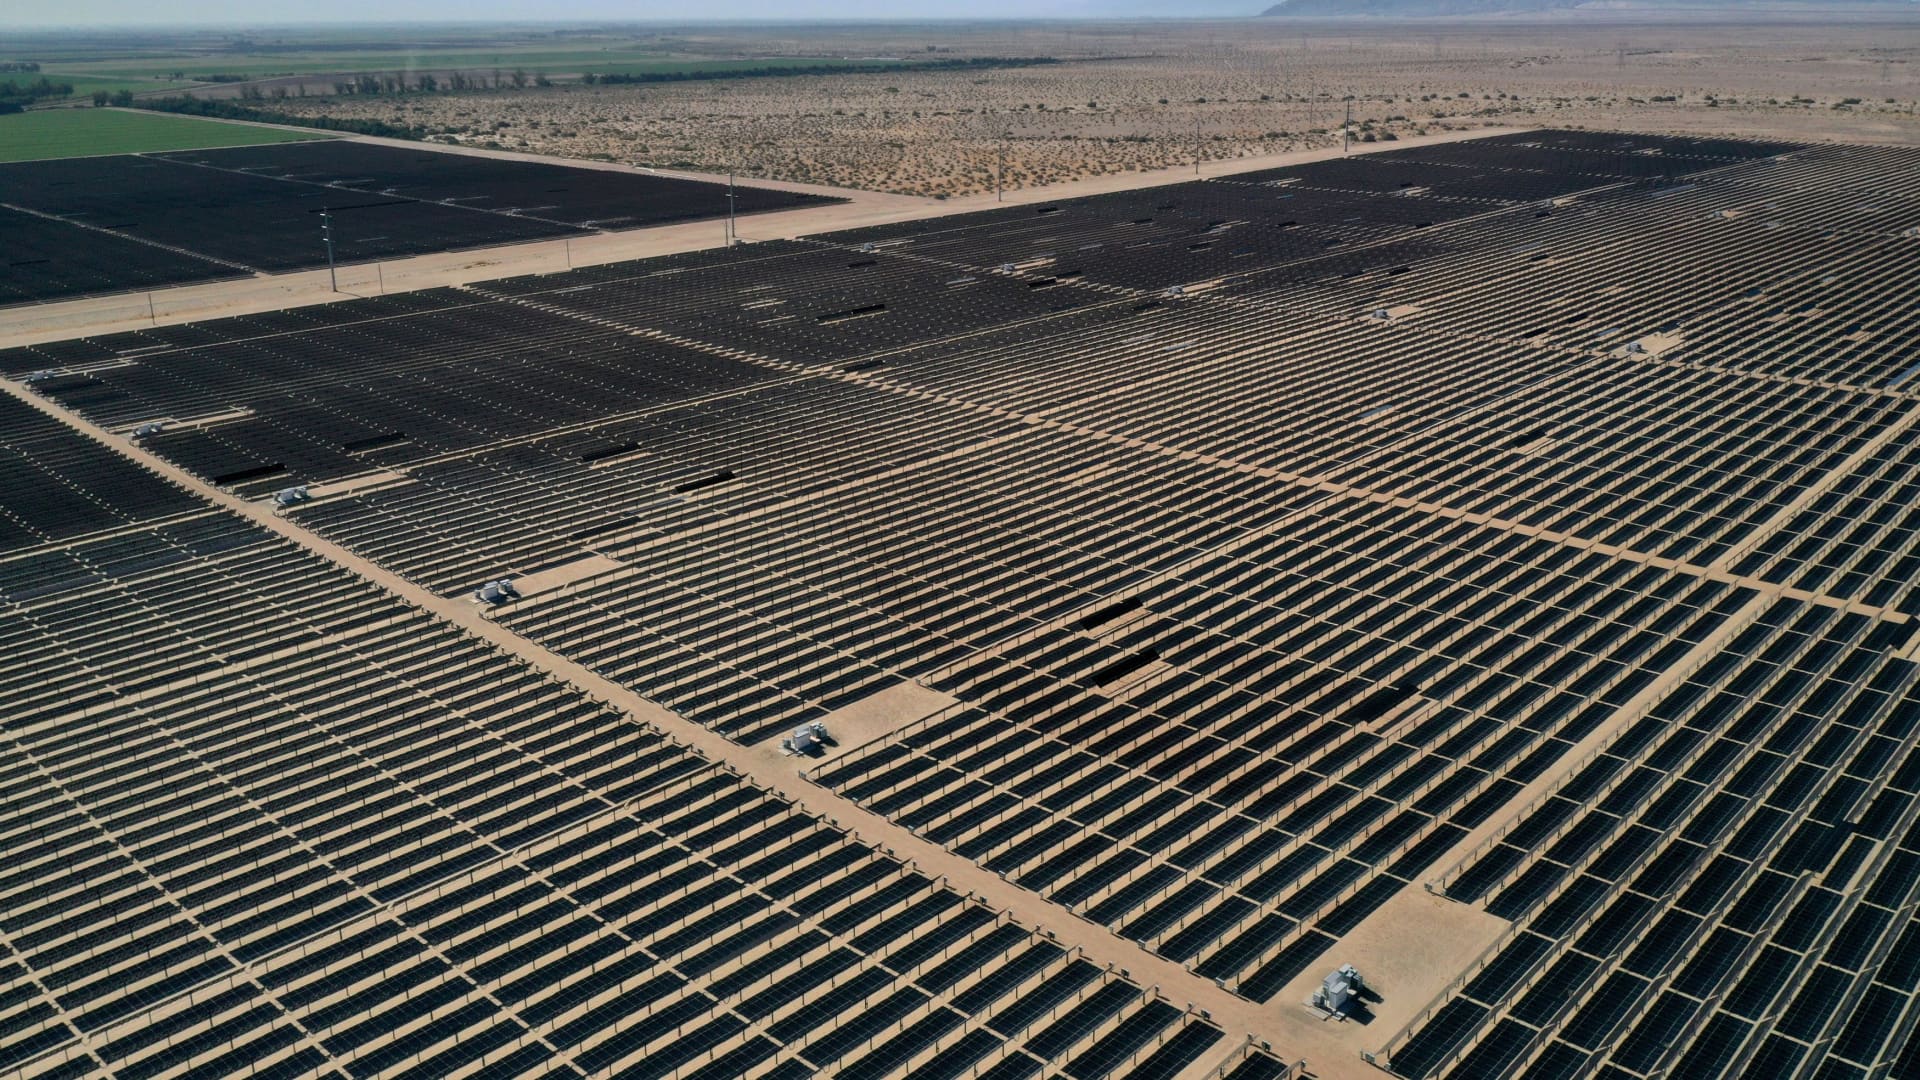 Arrays of photovoltaic solar panels are seen at the Tenaska Imperial Solar Energy Center South in this aerial photo taken over El Centro, California, U.S., May 29, 2020. Picture taken with a drone.